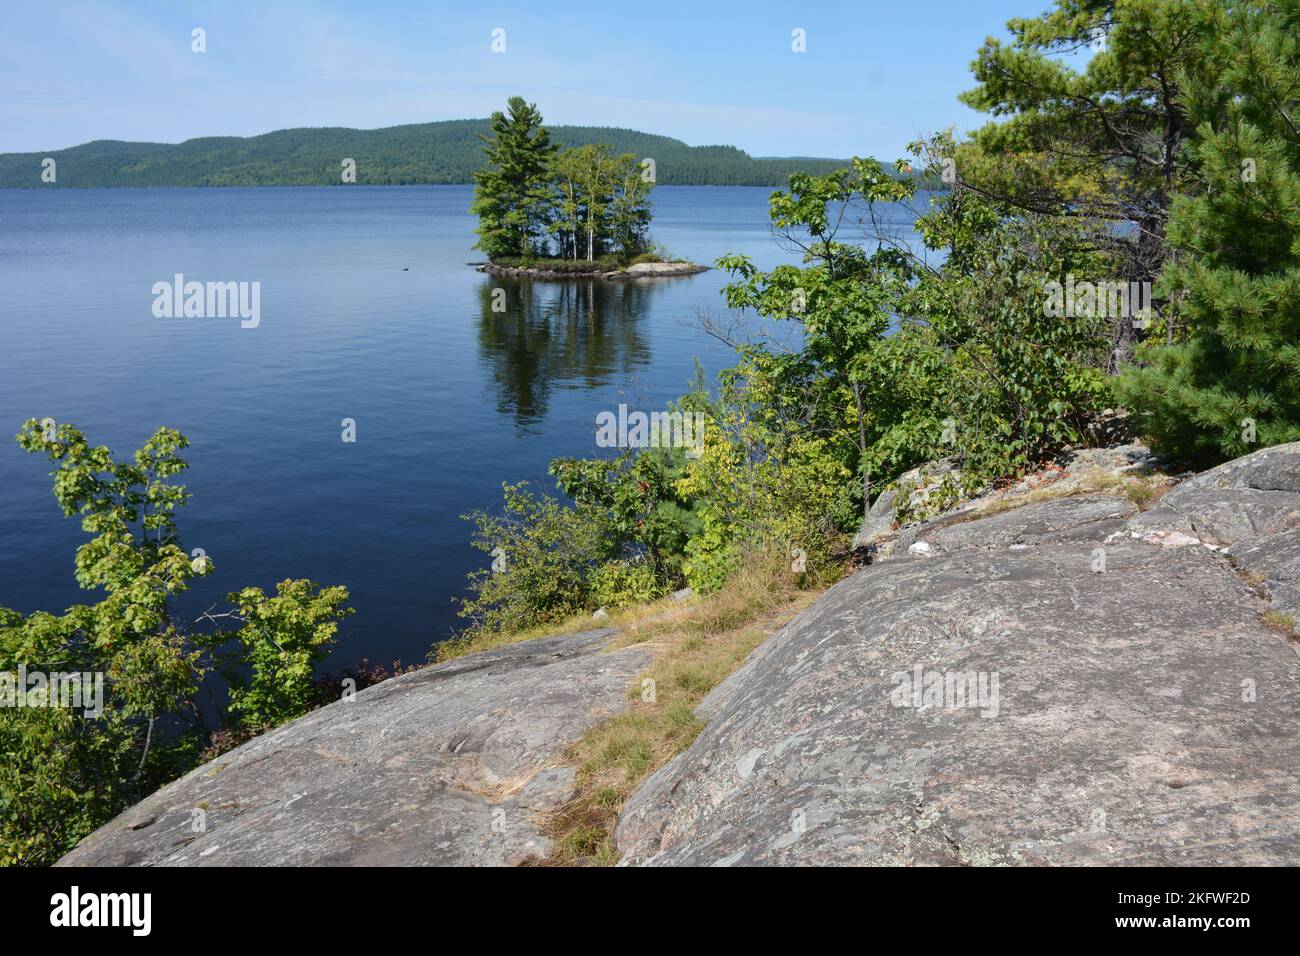 Views of the Ottawa River from a high point on the Canadian Shield Stock Photo